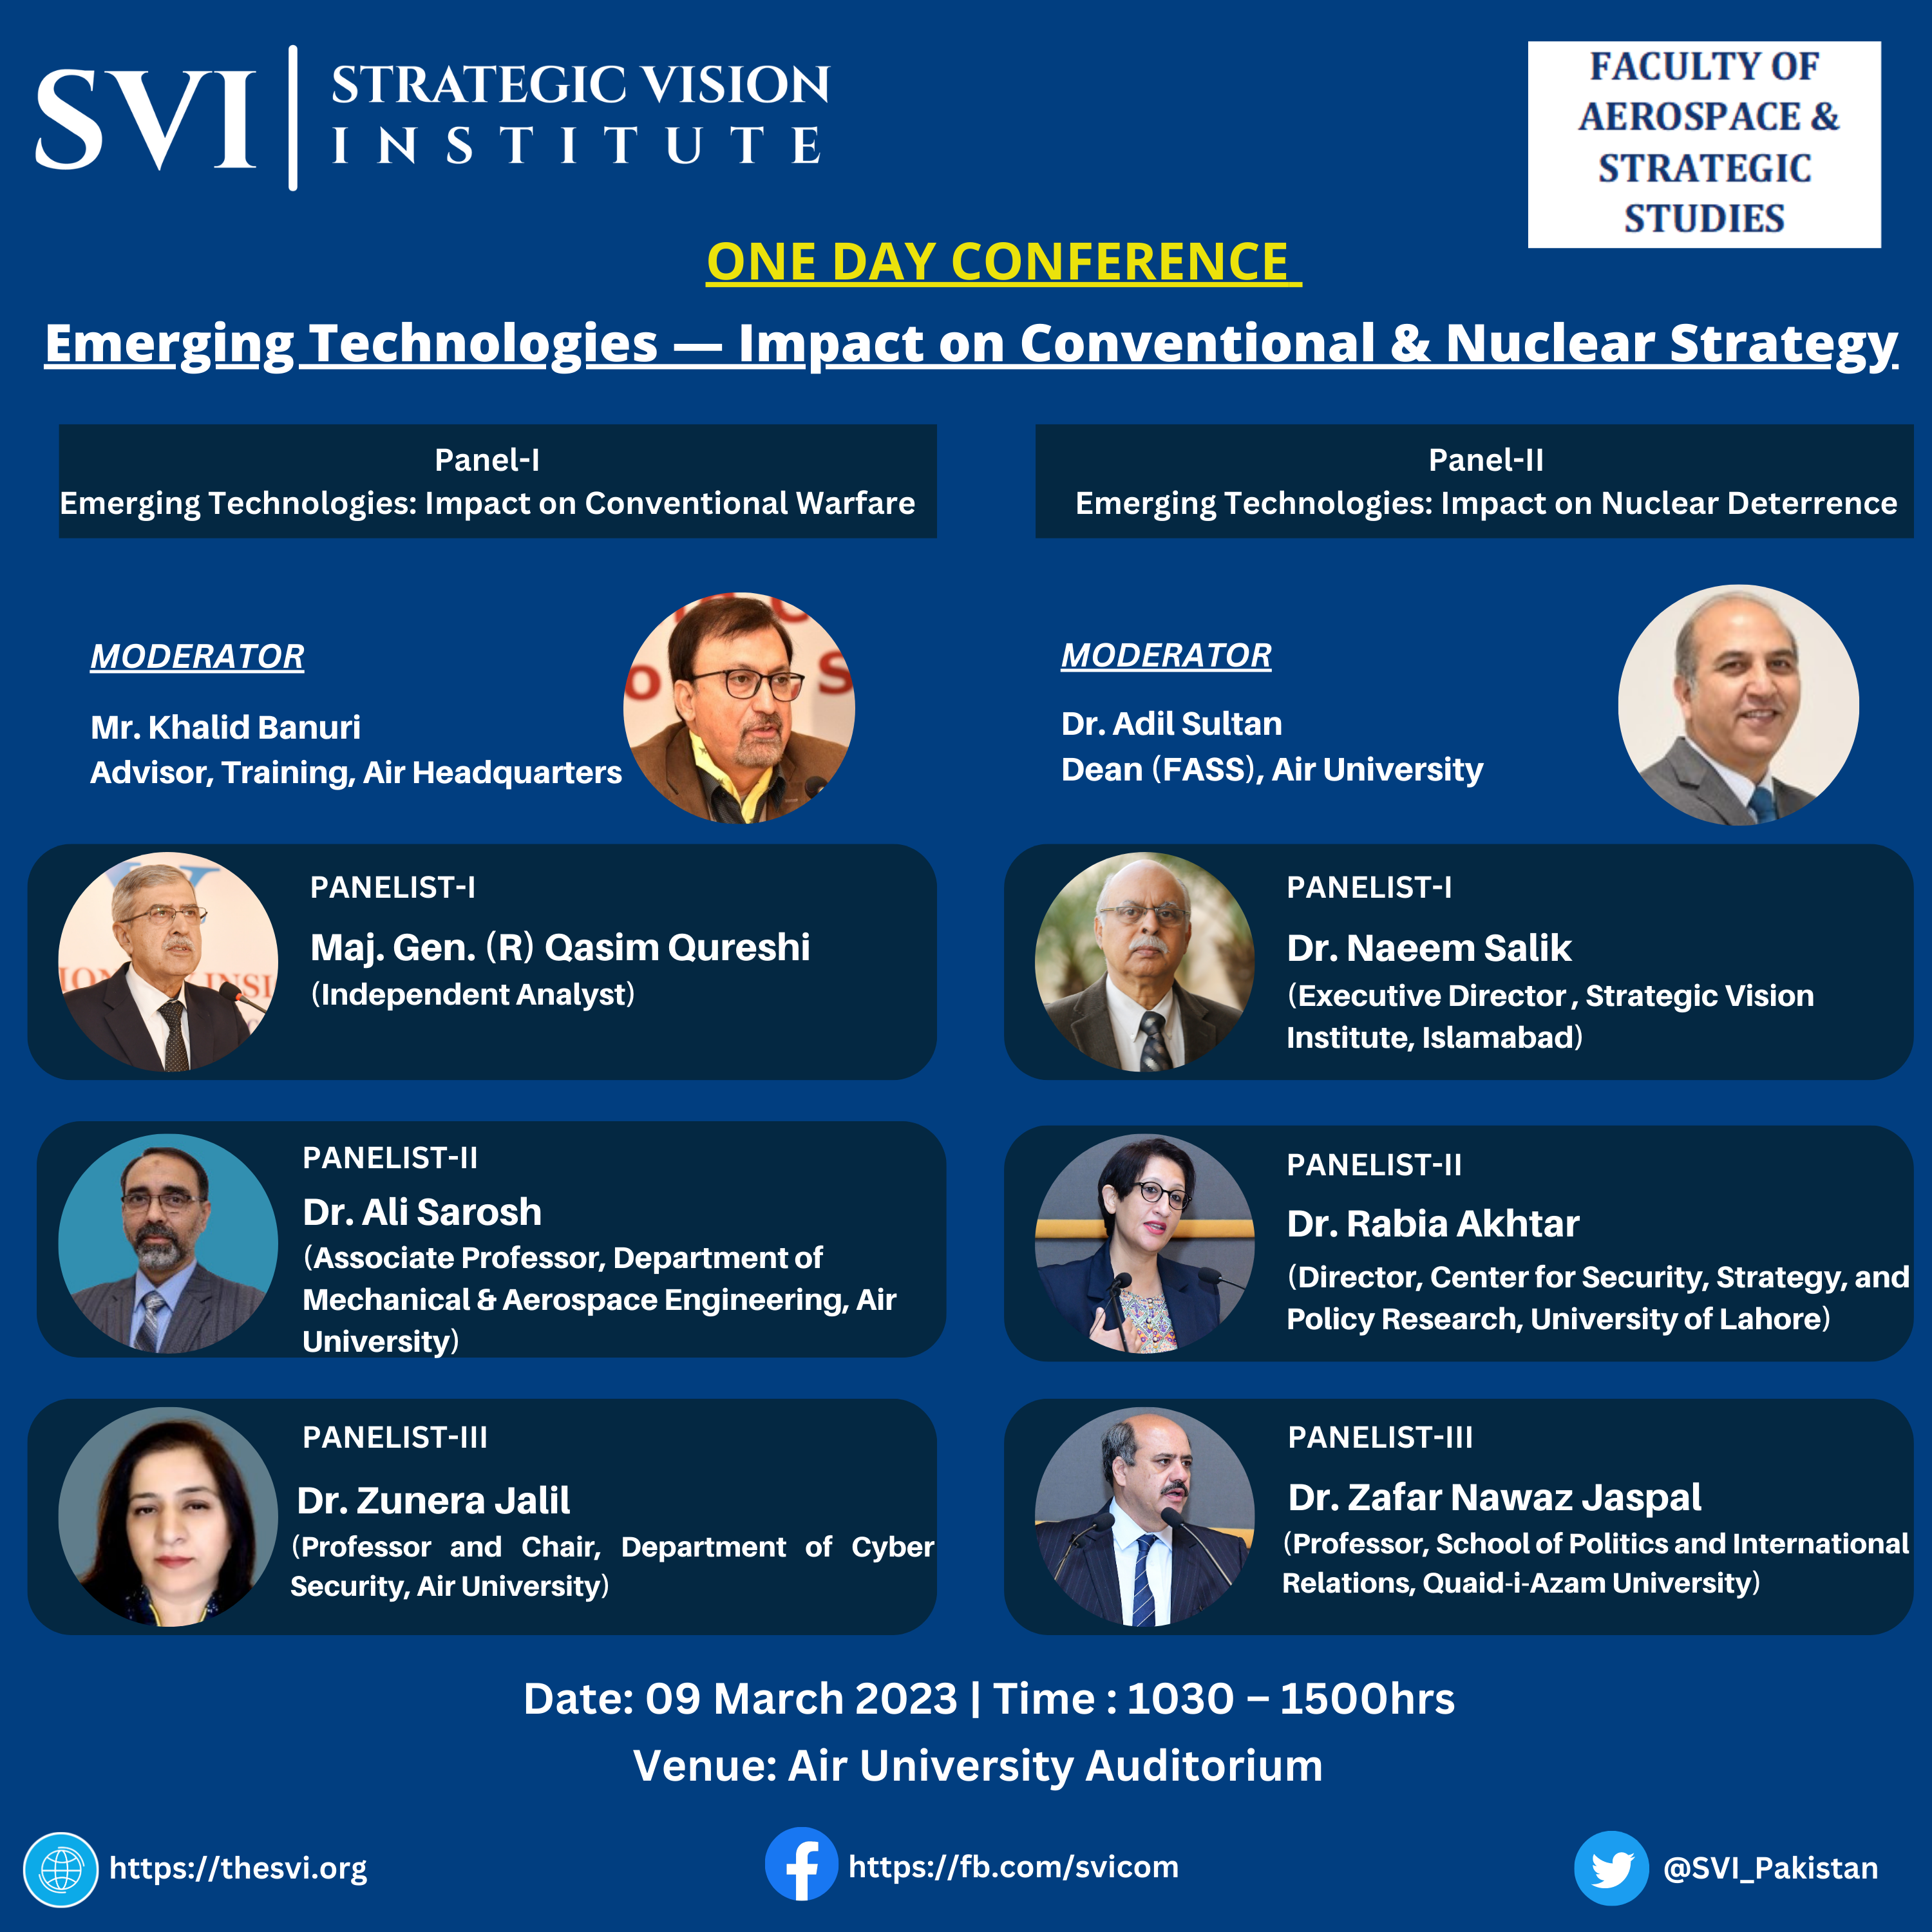 One-Day Conference “Emerging Technologies — Impact on Conventional & Nuclear Strategy” ,Date- 09 March 2023